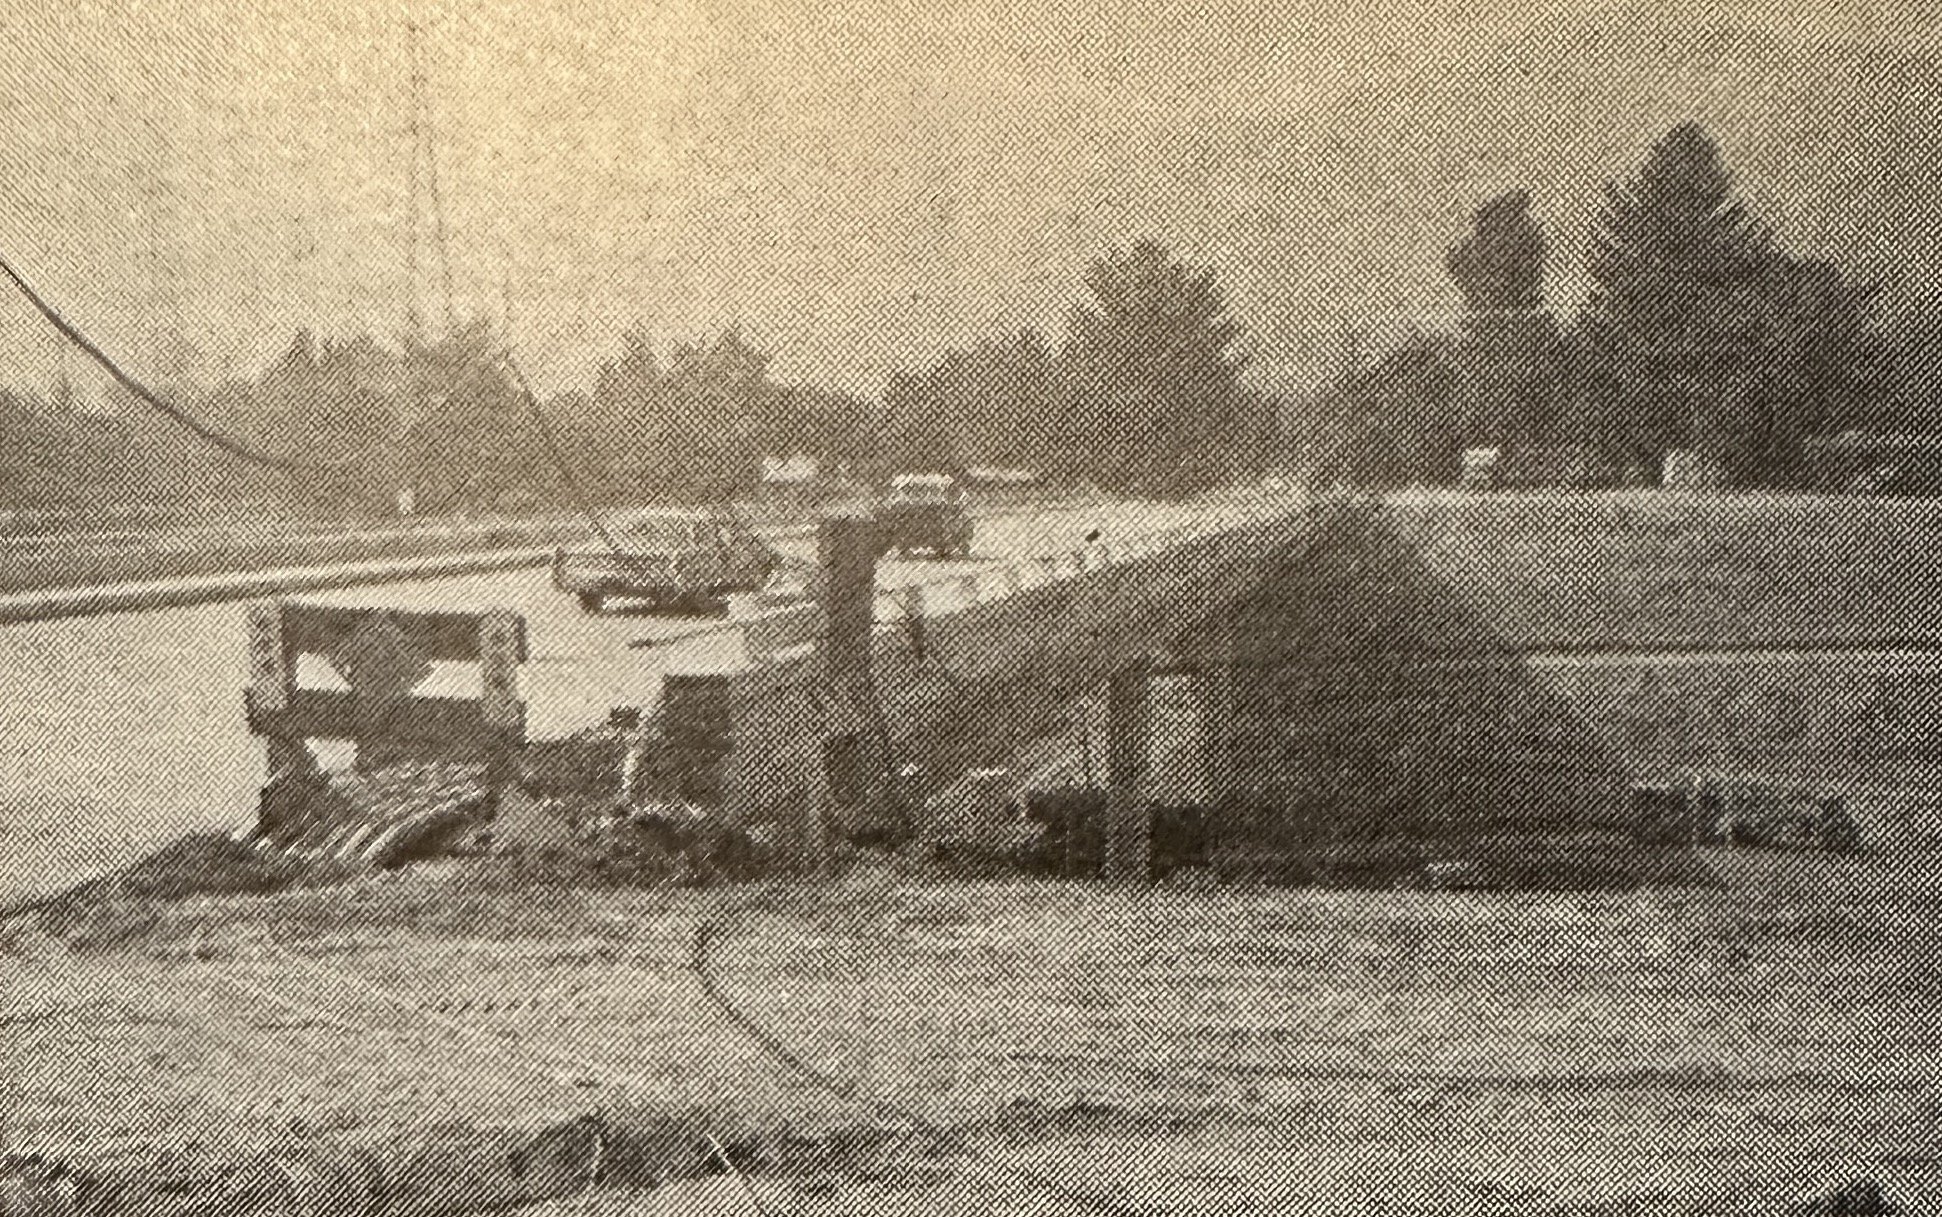  Image from the  La Cañada Valley Sun  illustrating an article on the completion of the Alta Canyada freeway bridge, published September 2, 1971.  